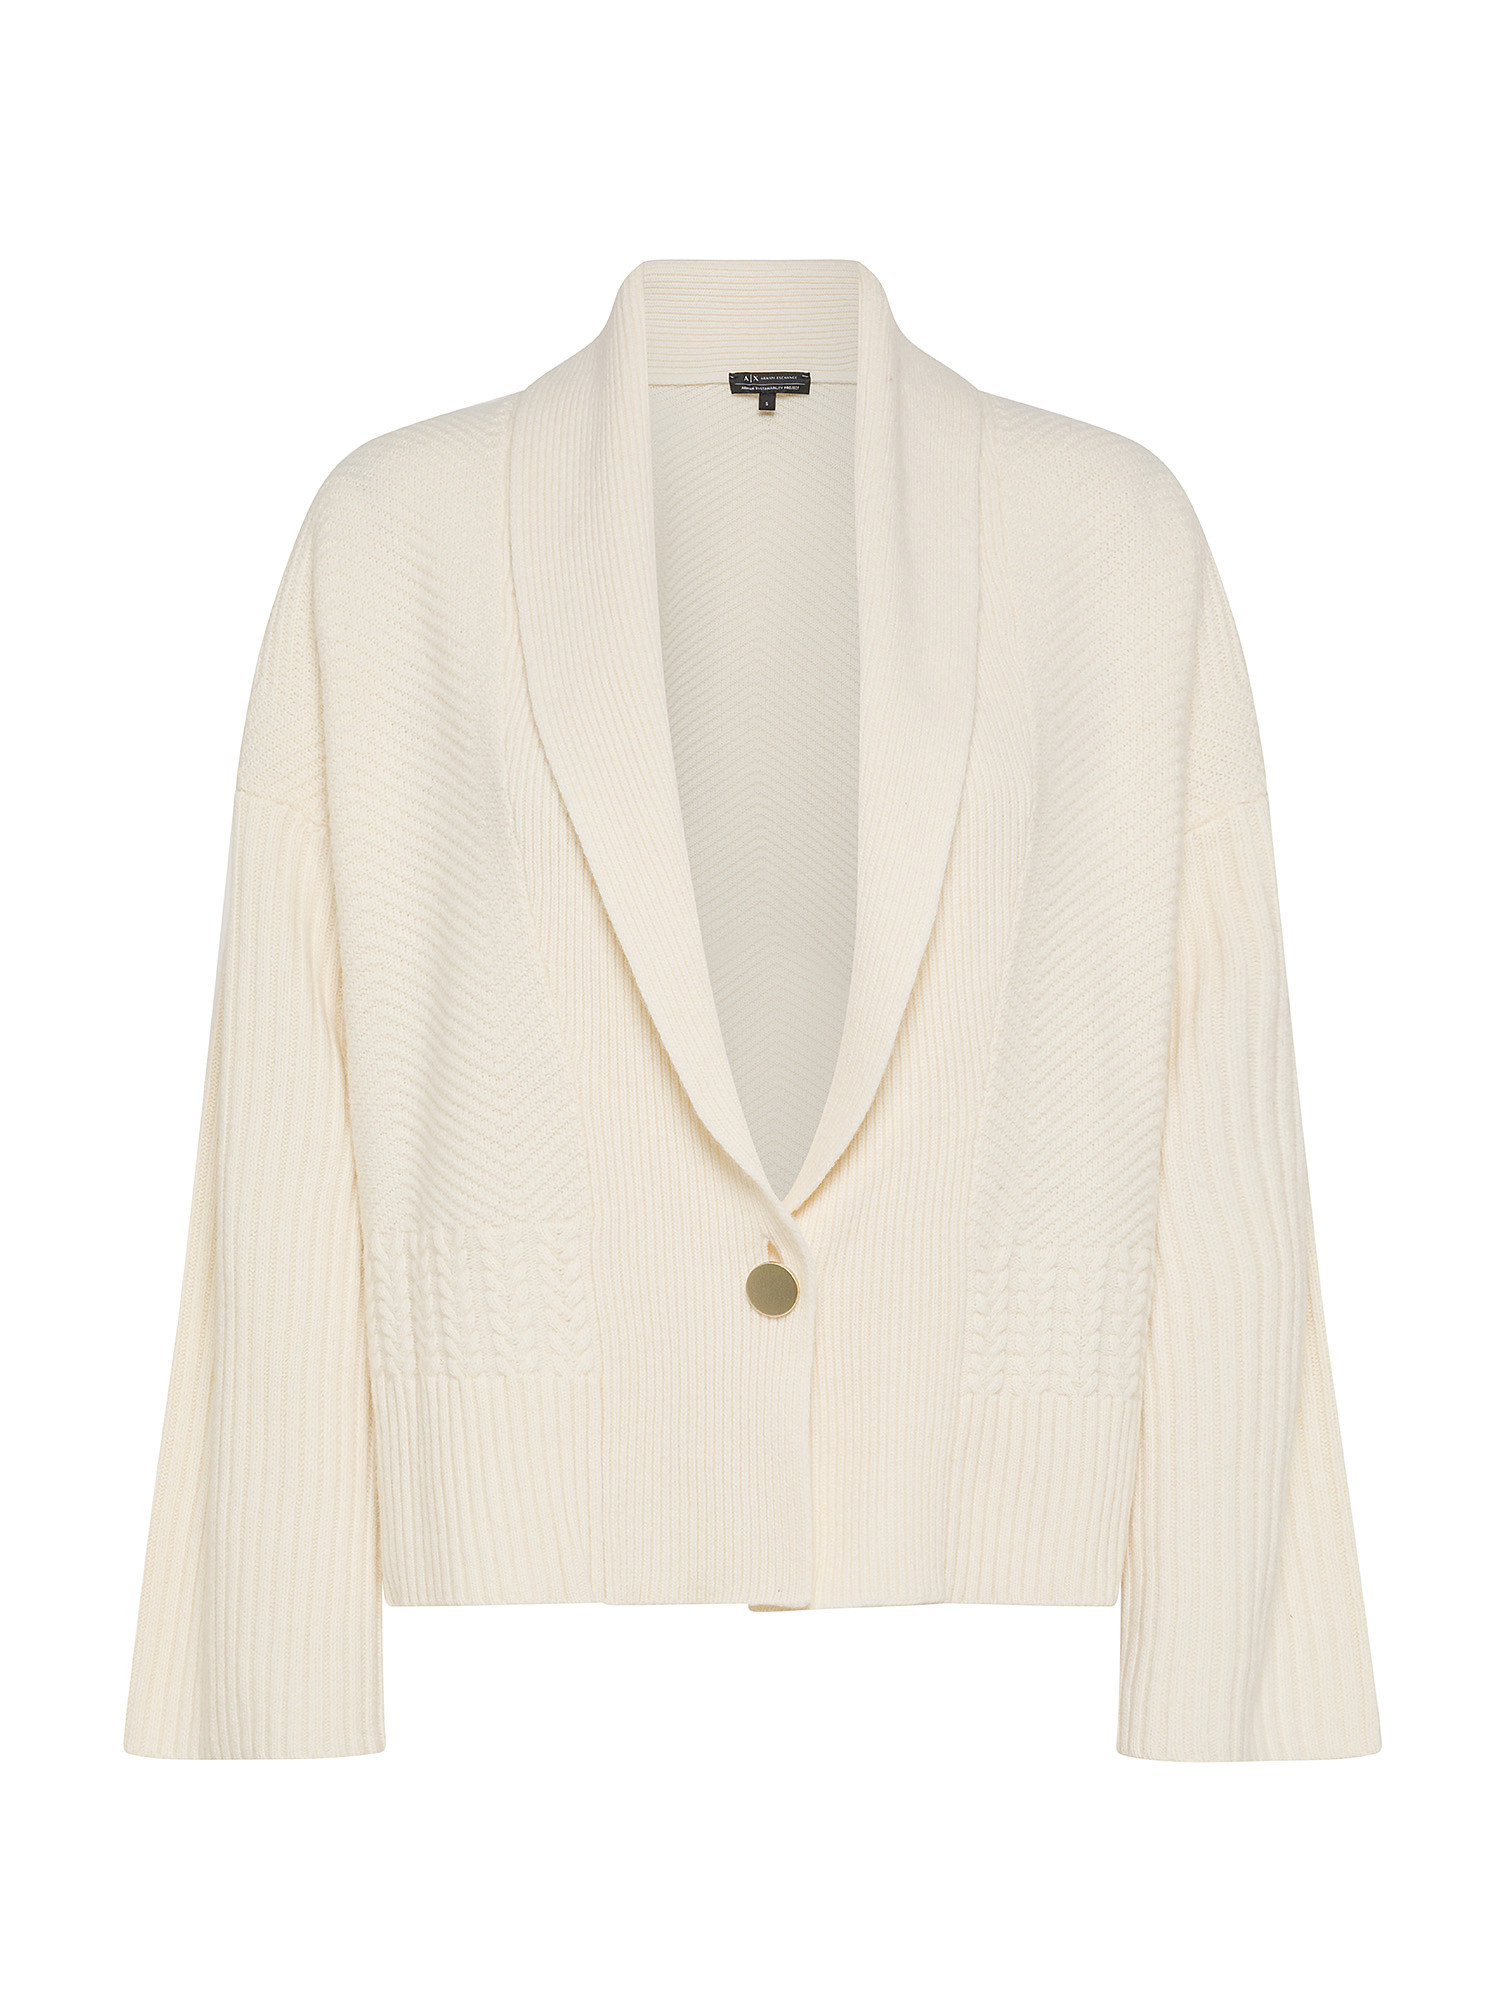 Armani Exchange - Cardigan in recycled wool blend, White, large image number 0